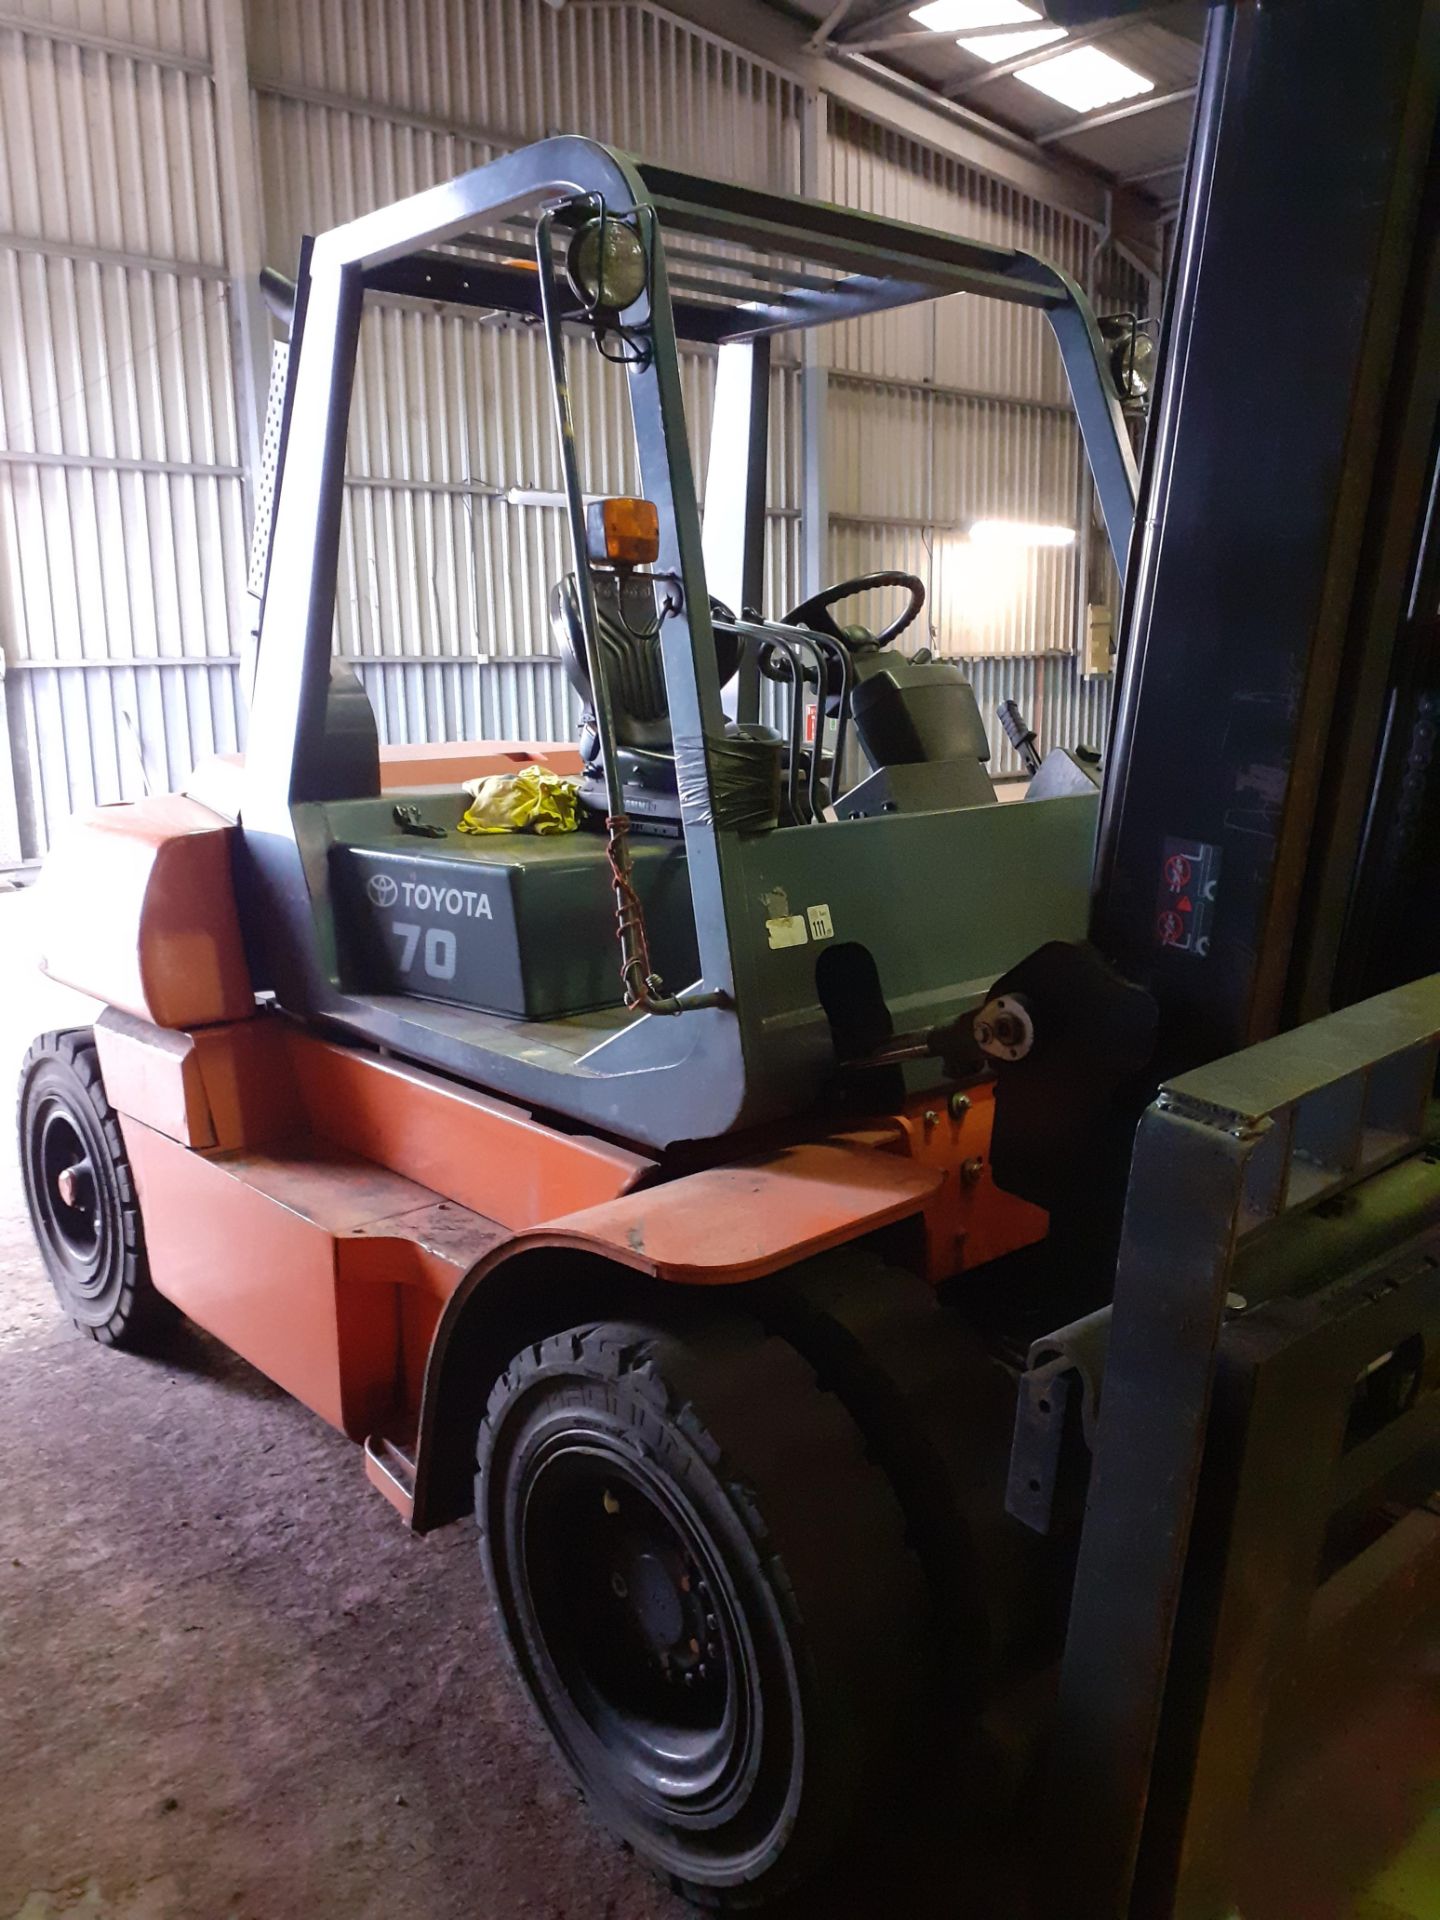 Toyota 50-5FD70D 7000kg Forklift Truck, max height 4.8m Serial Number 50SFD7OE3025 (2012) fitted - Image 5 of 5